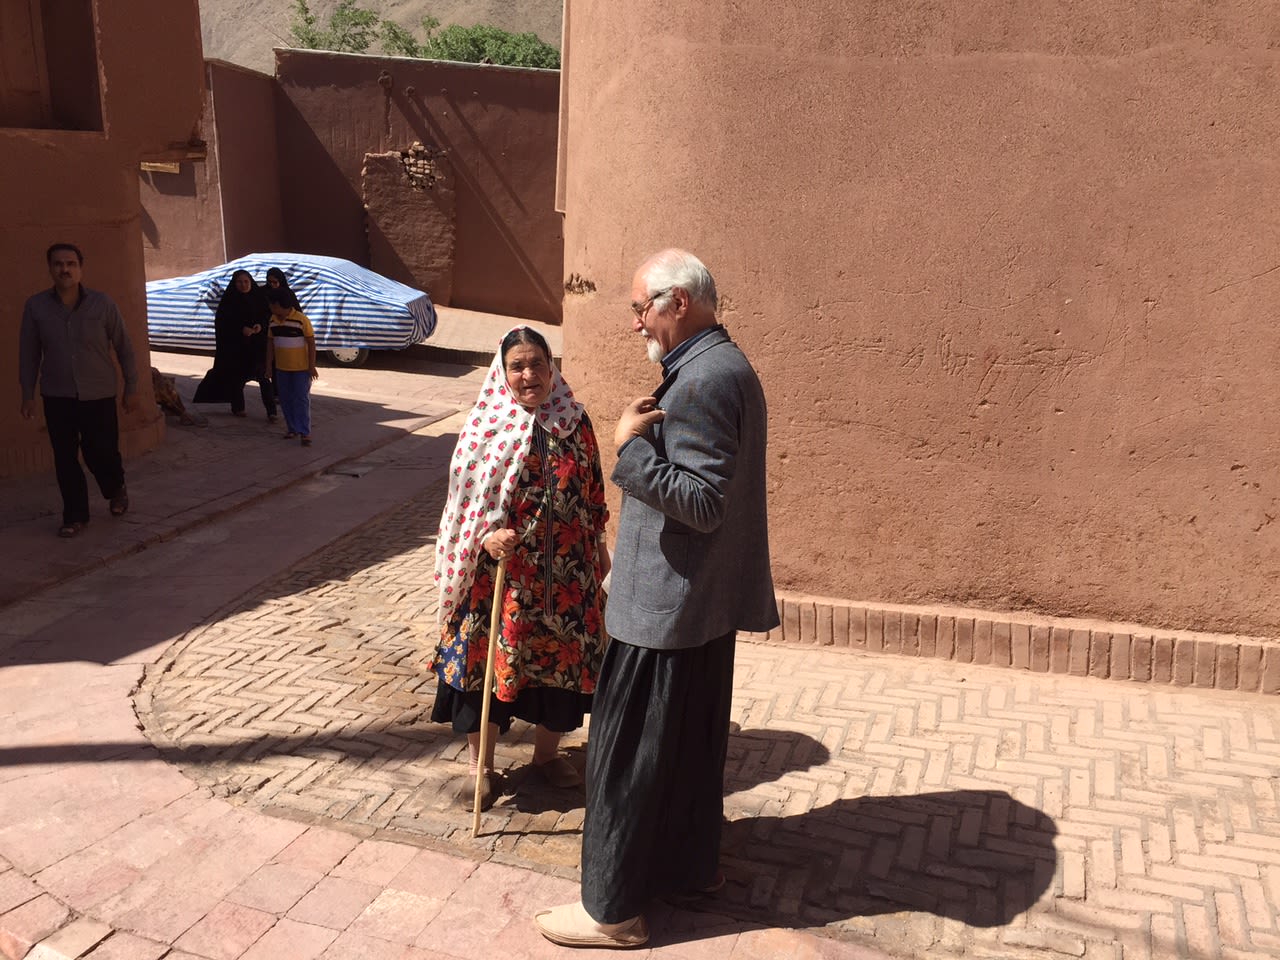  Alirezai speaks with Amiri. He tells CNN that Abyaneh used to be and still is often called upon to draw up contracts and agreements between towns and individuals because they are known for finding wise and fair solutions. 